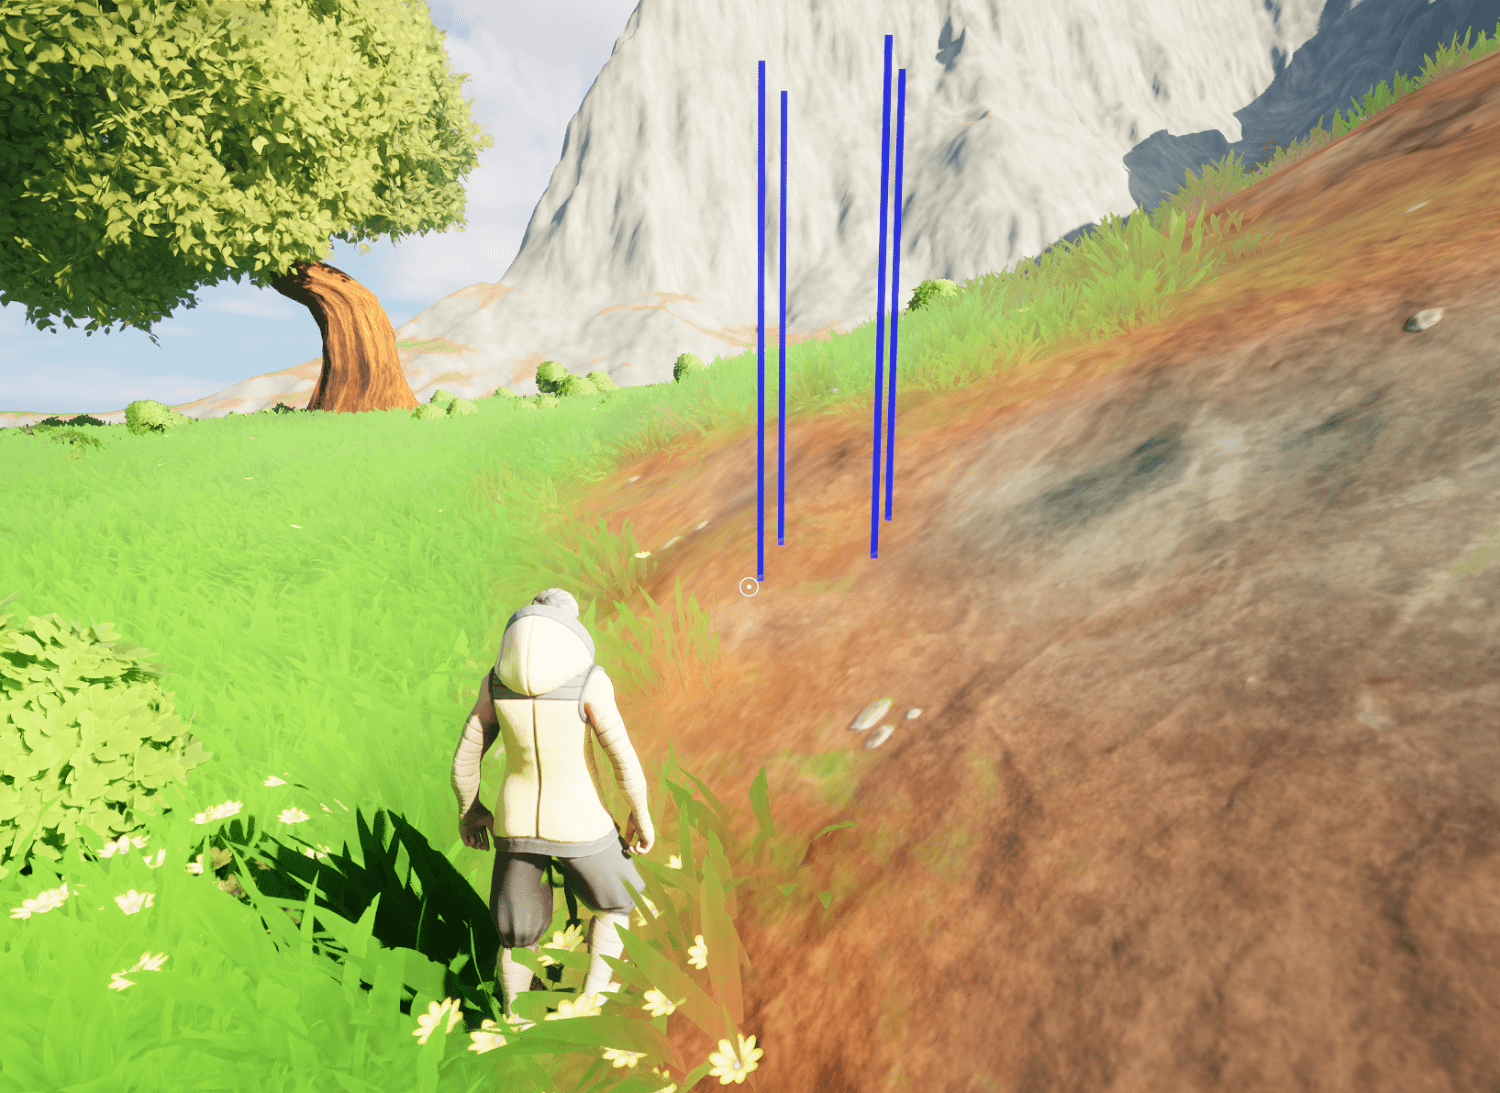 We do a line trace for each corner of the chest to learn what the terrain looks like